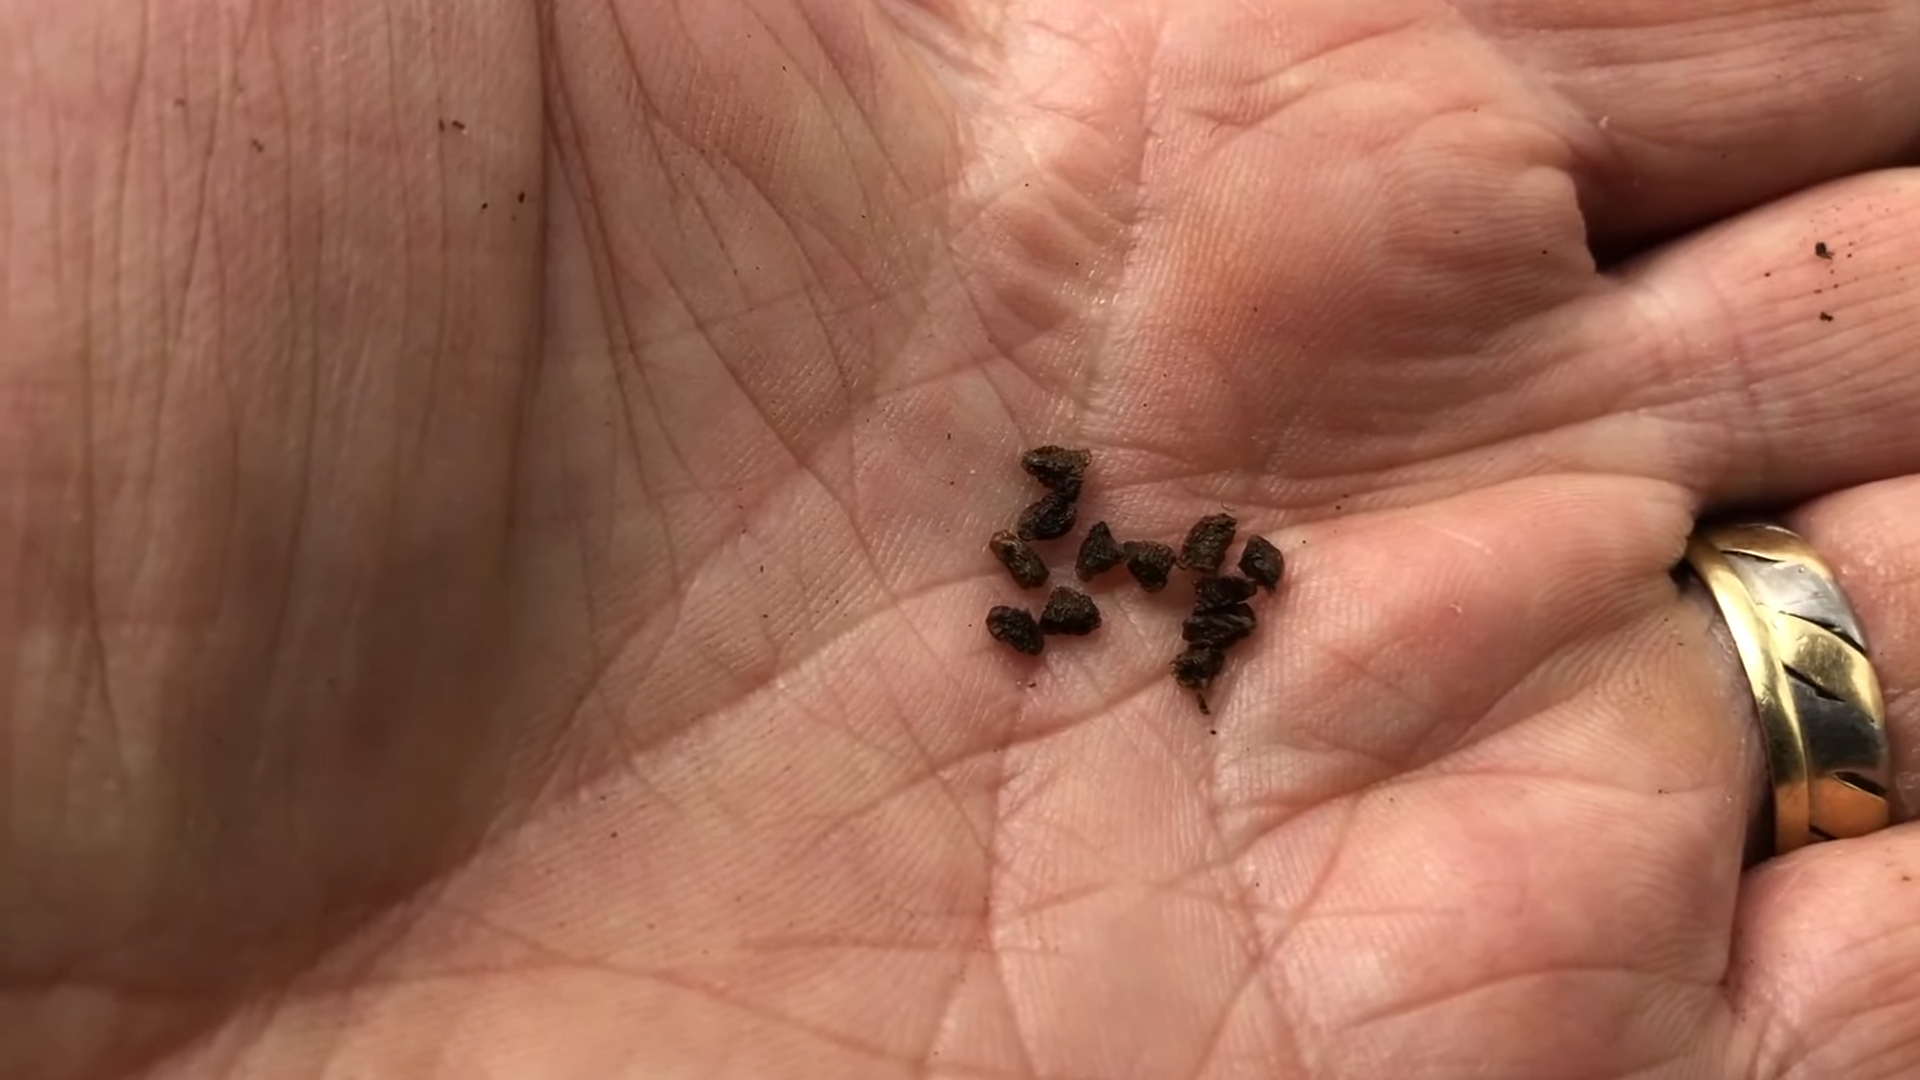 Delphinium seeds in a person’s hand